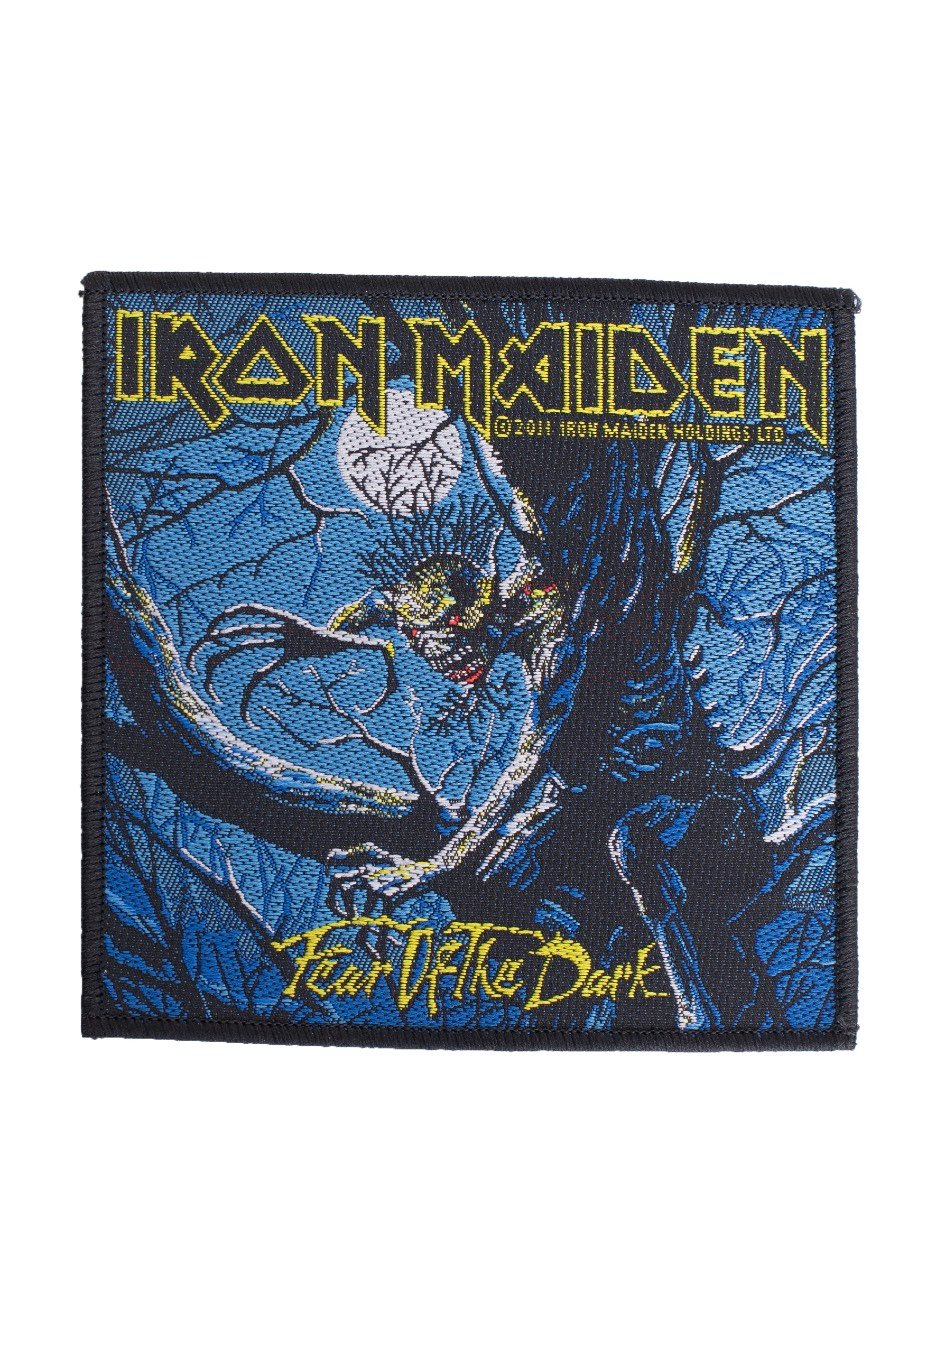 Iron Maiden - Fear Of The Dark - Patch